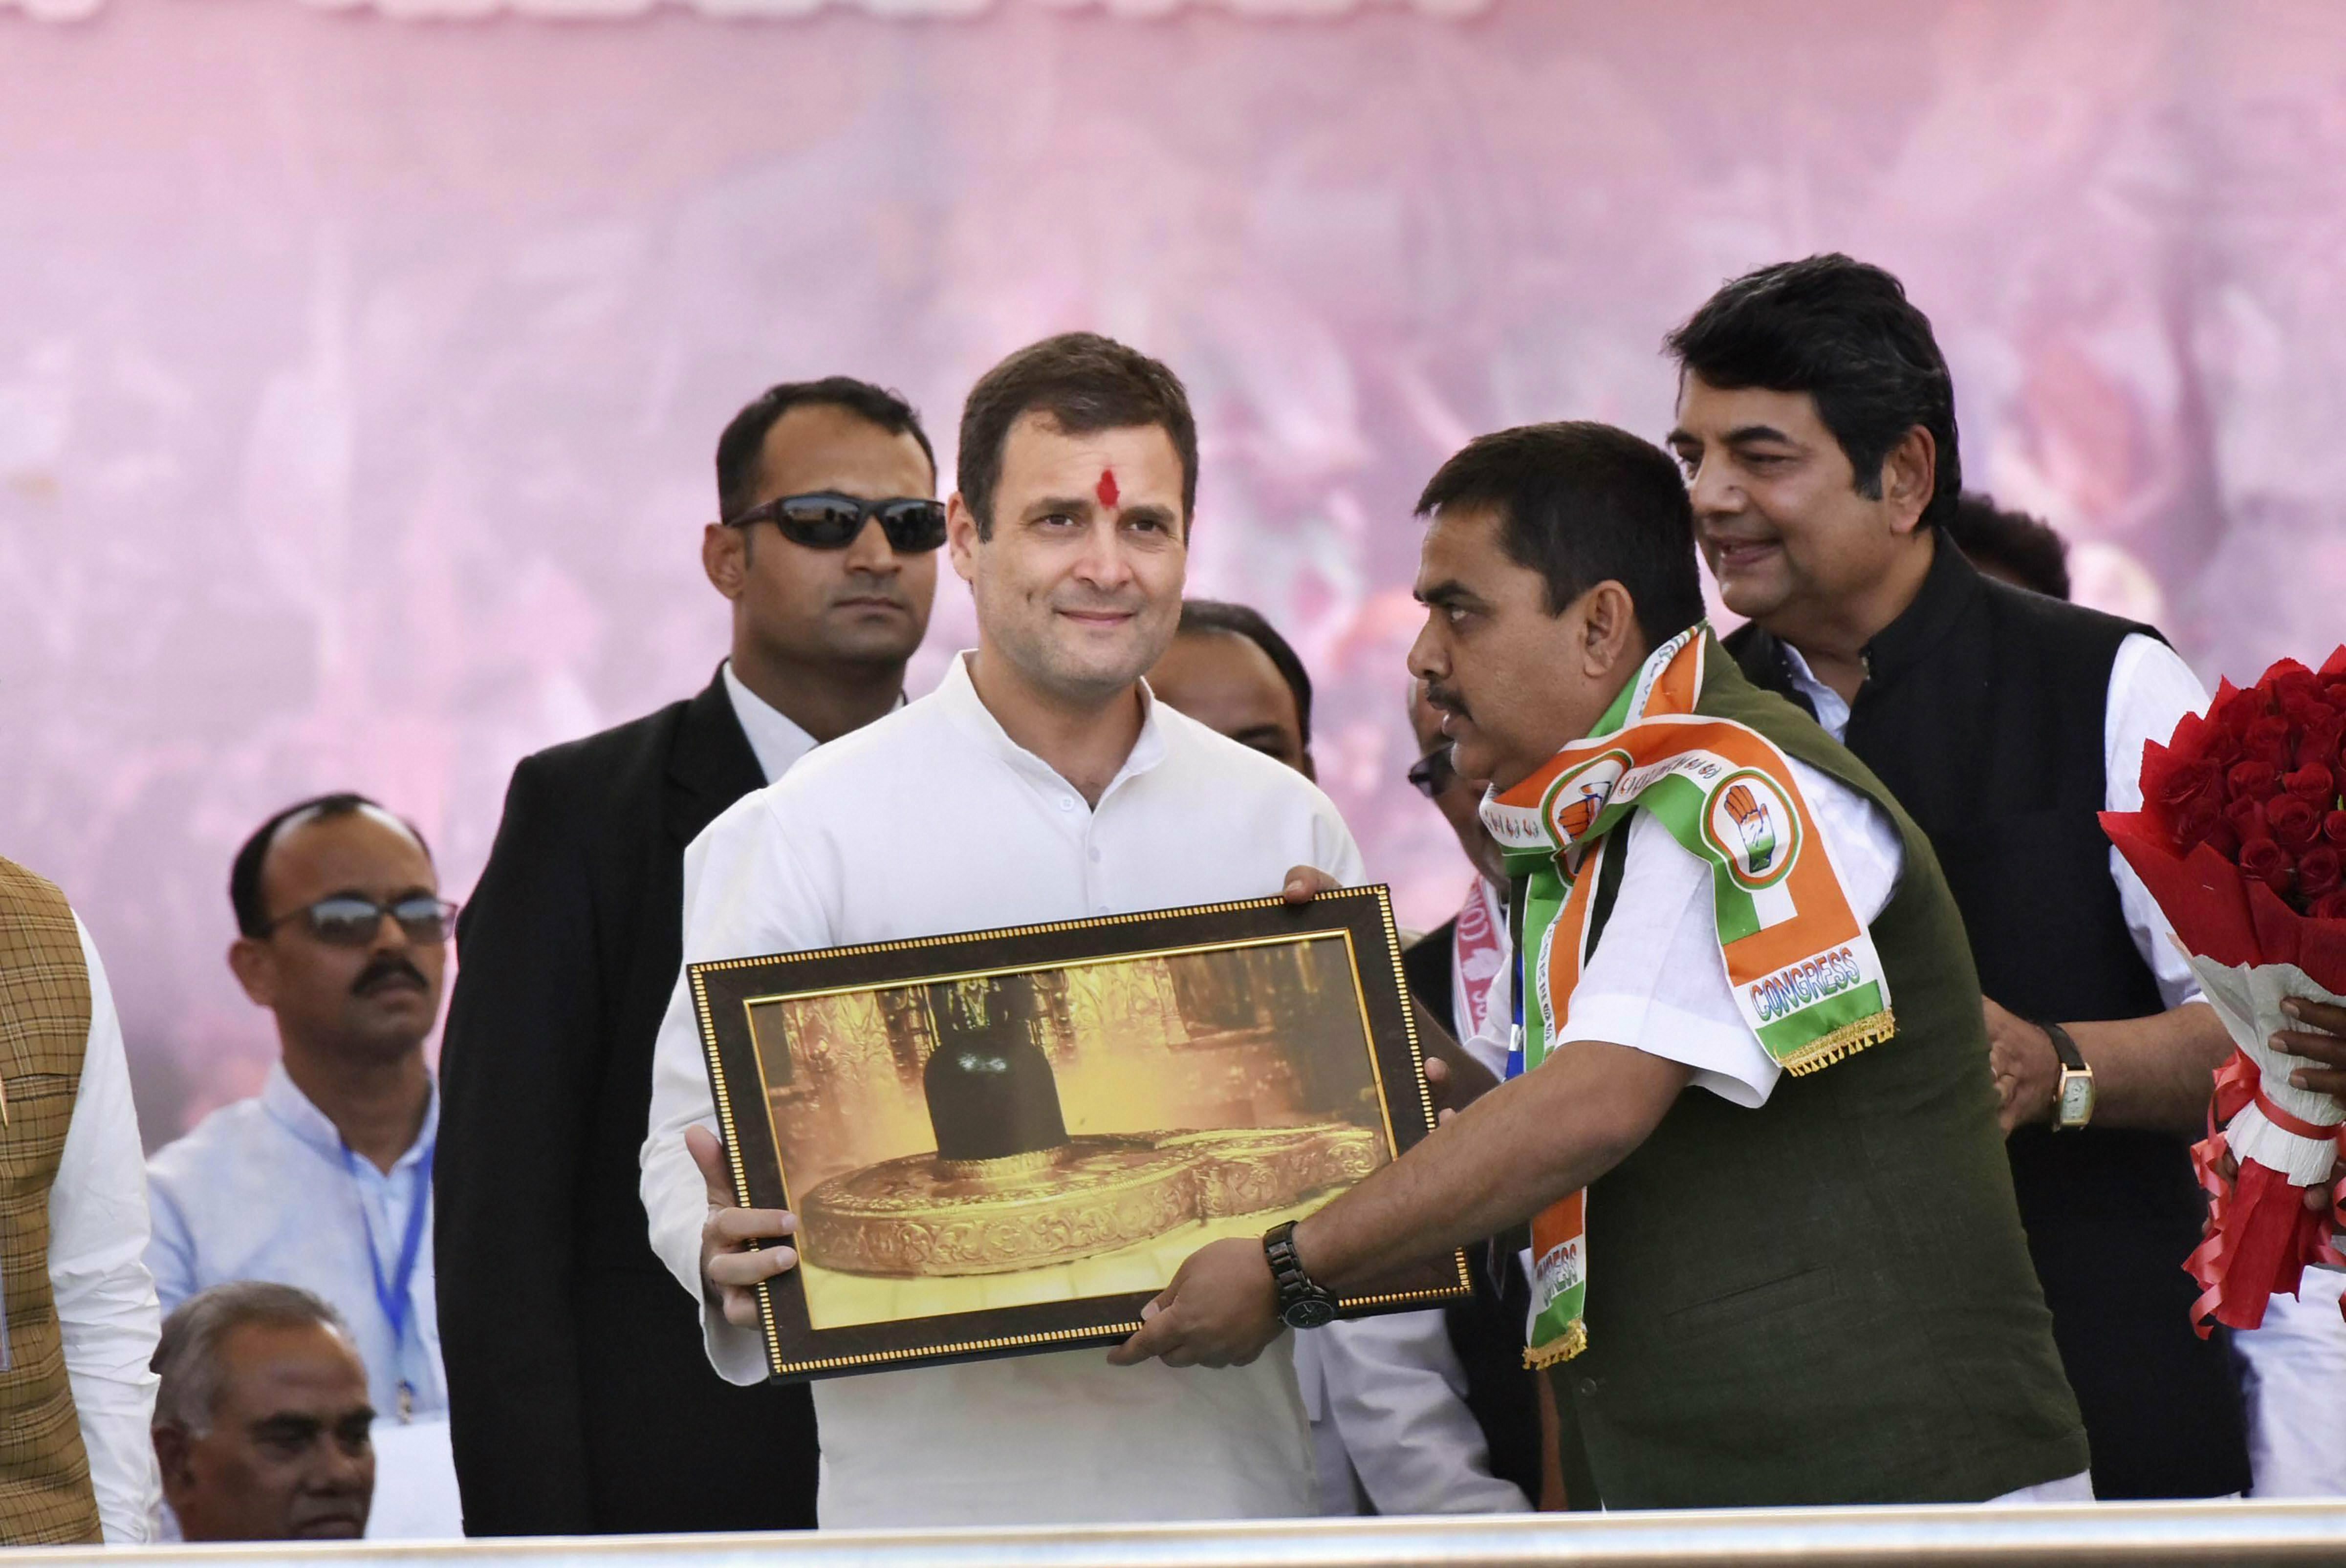 Congress President Rahul Gandhi being felicitated by party workers during 'Ulgulan' rally, in Ranchi - PTI